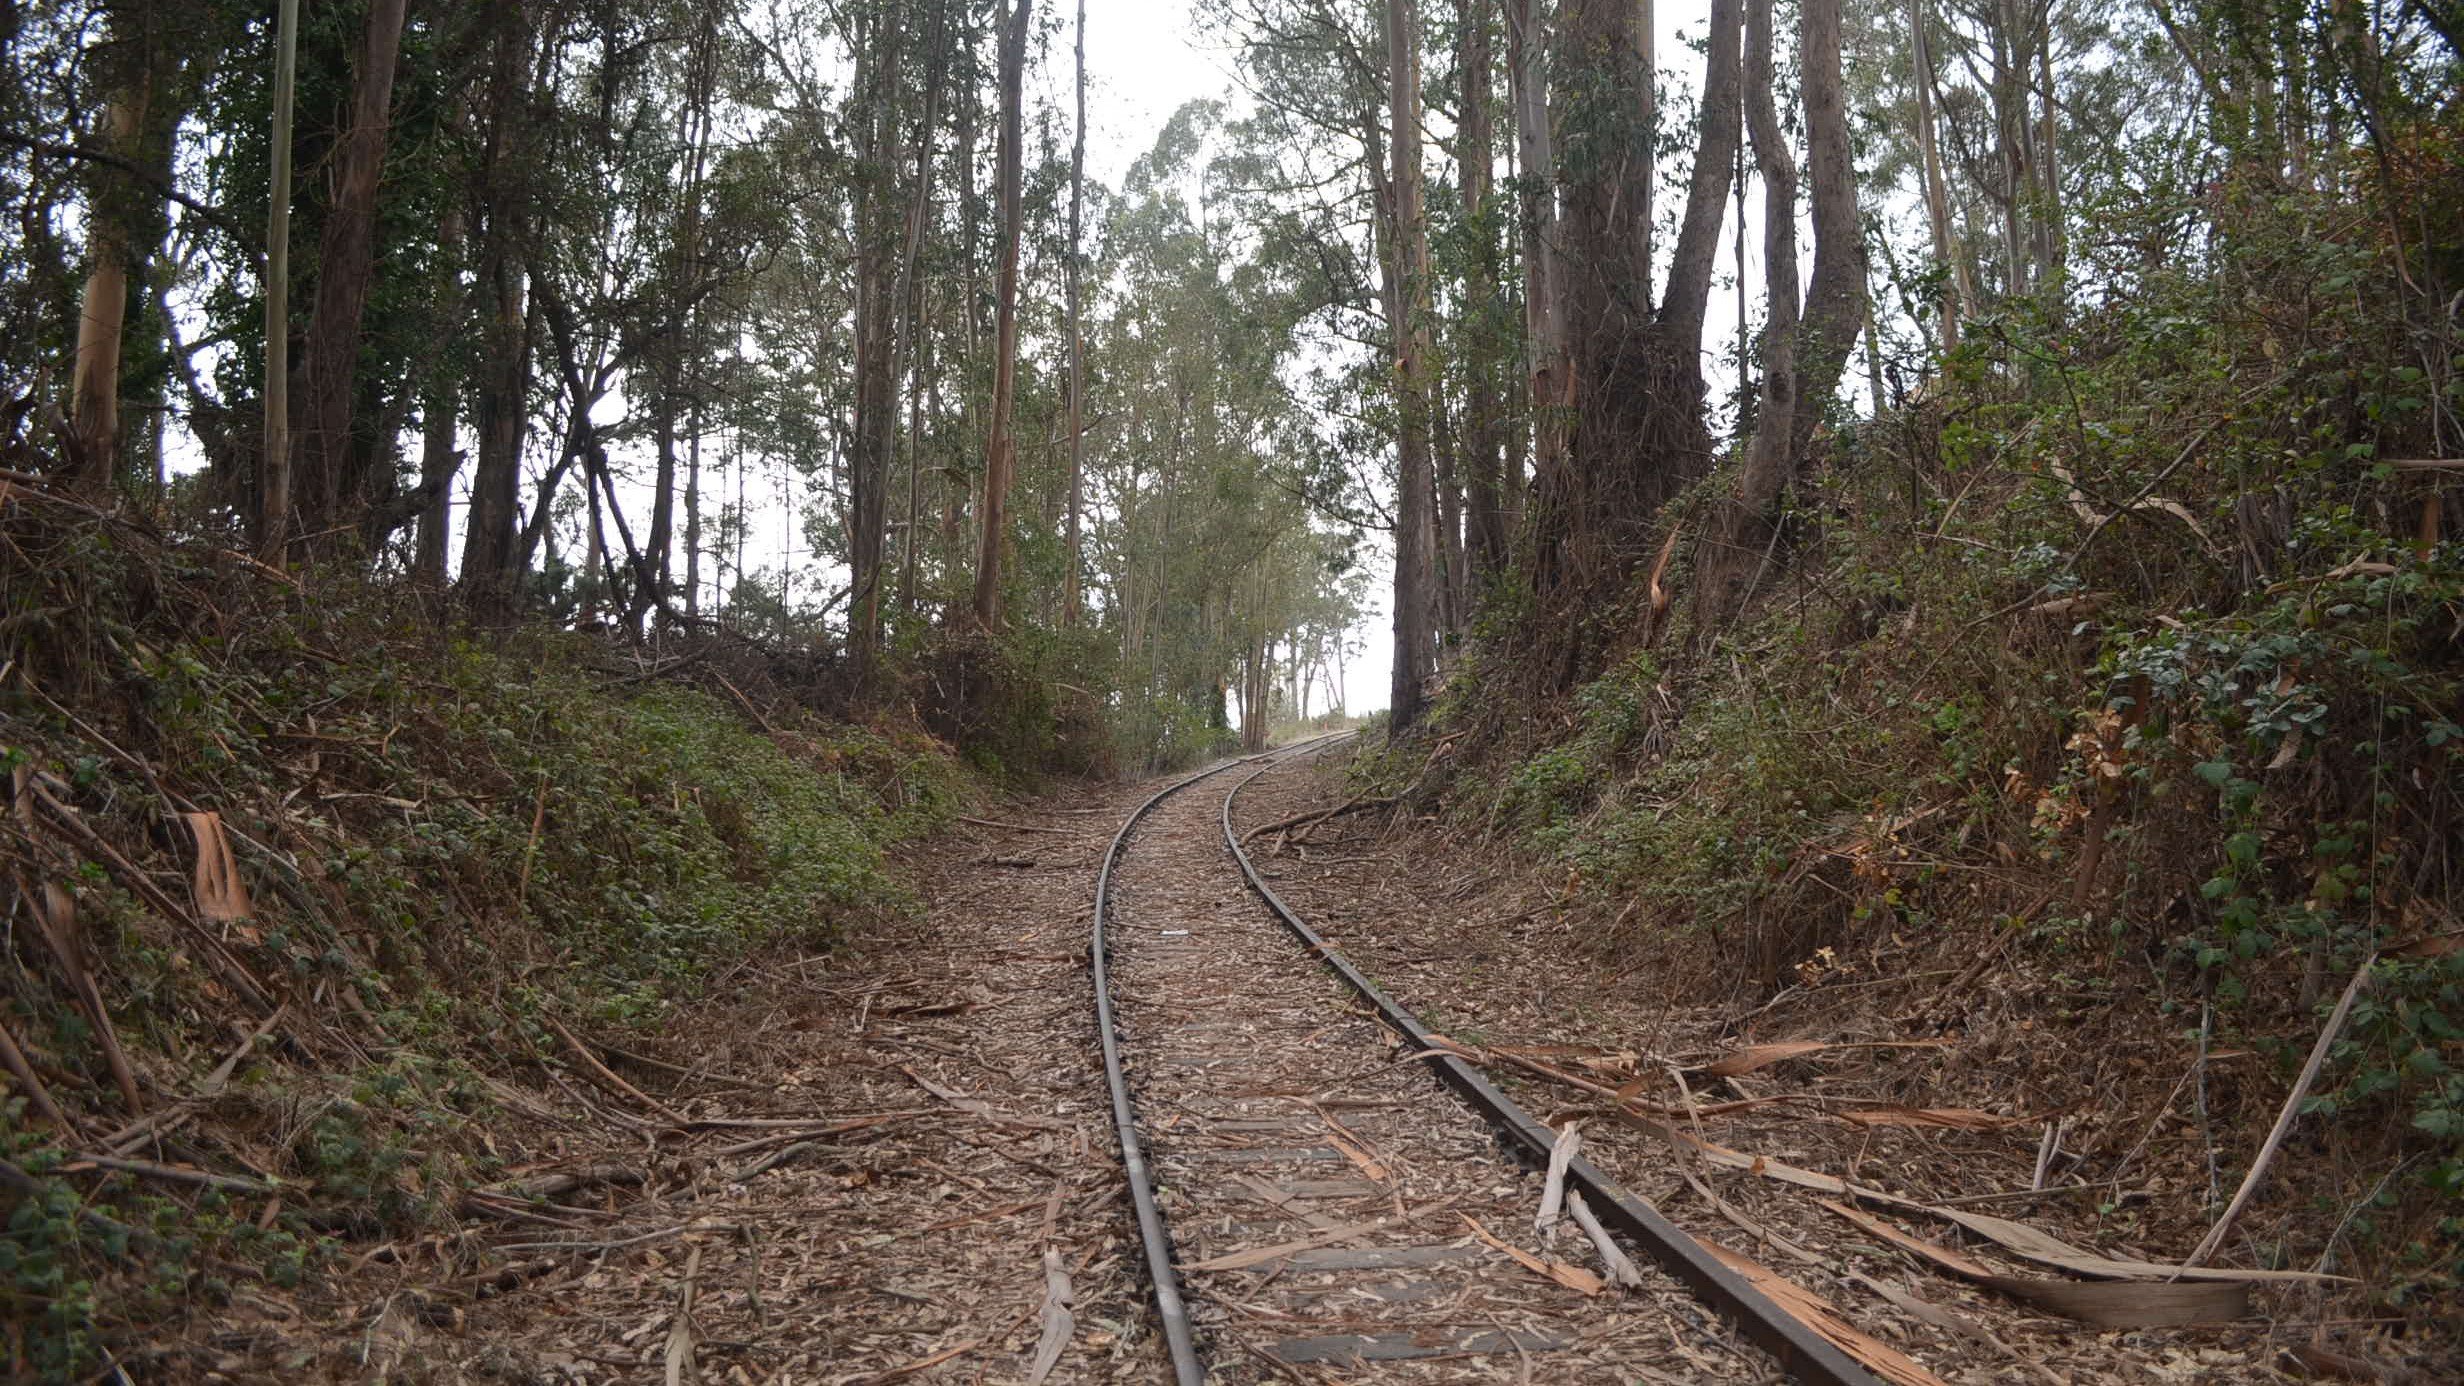 The rail line curves to the right and disappears behind a stand of eucalyptus trees. The tracks are covered in leaves.